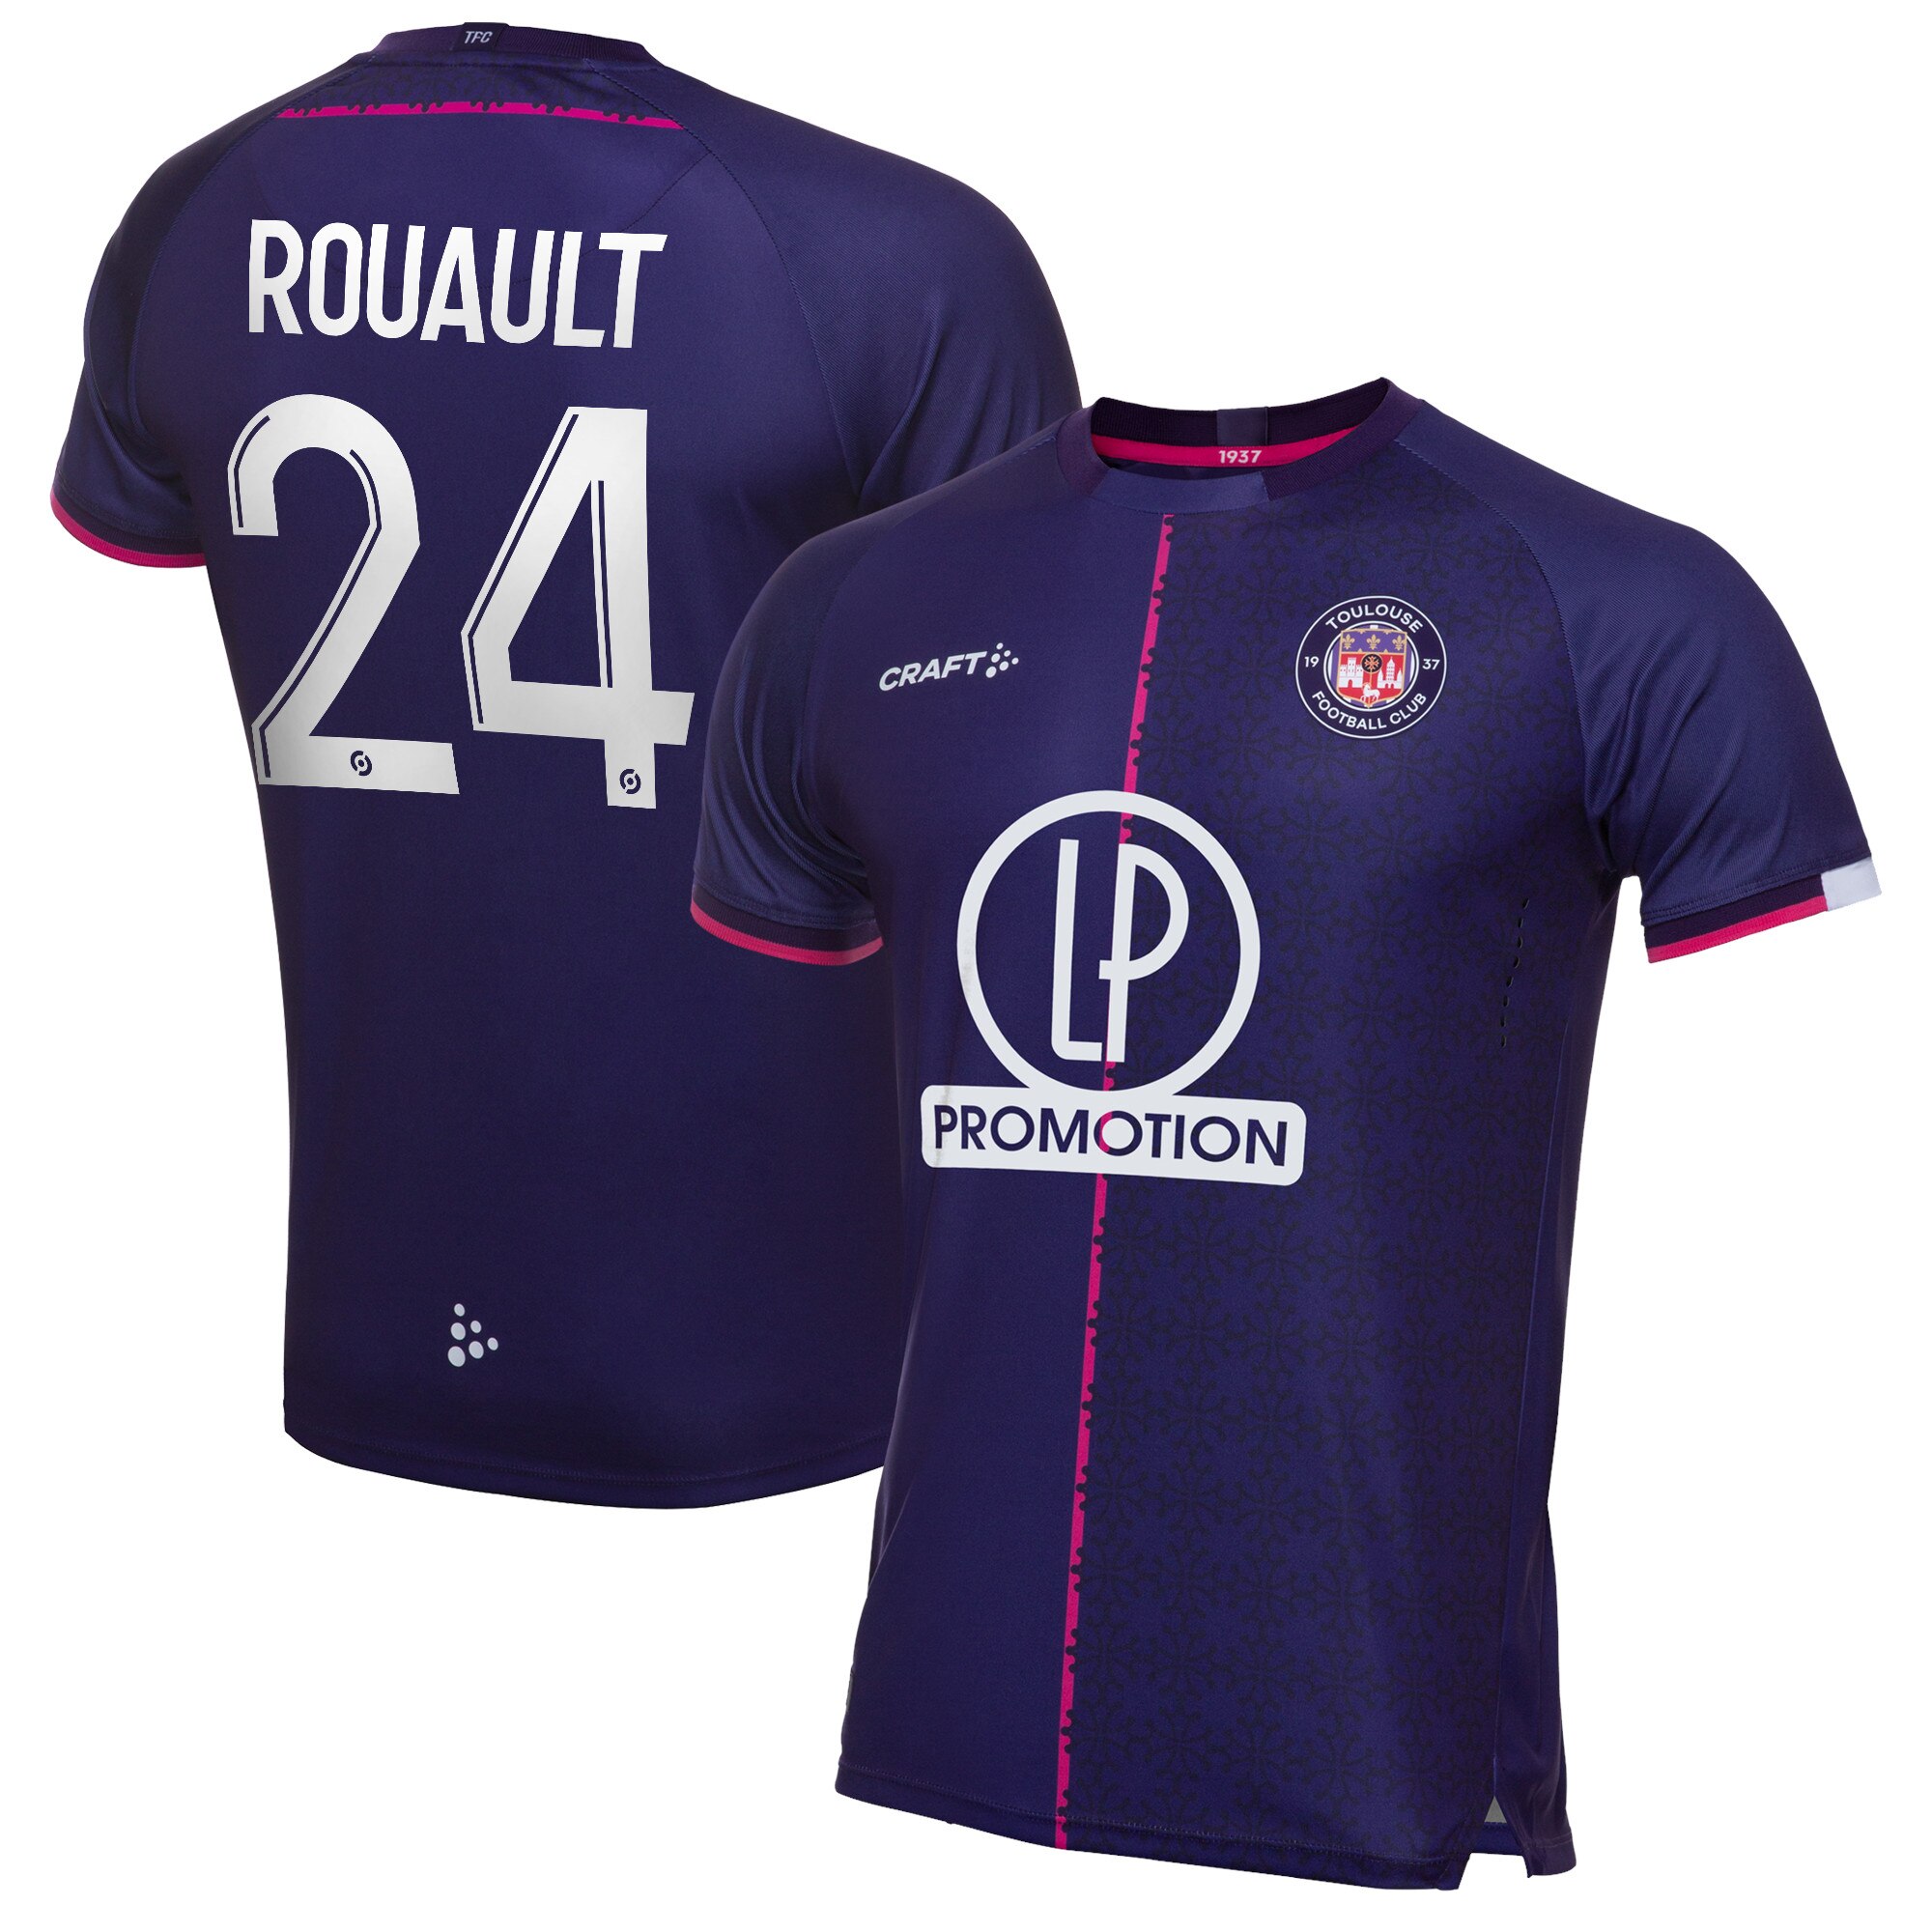 Toulouse Football Club Home Pro Shirt 2021-22 with Rouault 24 printing